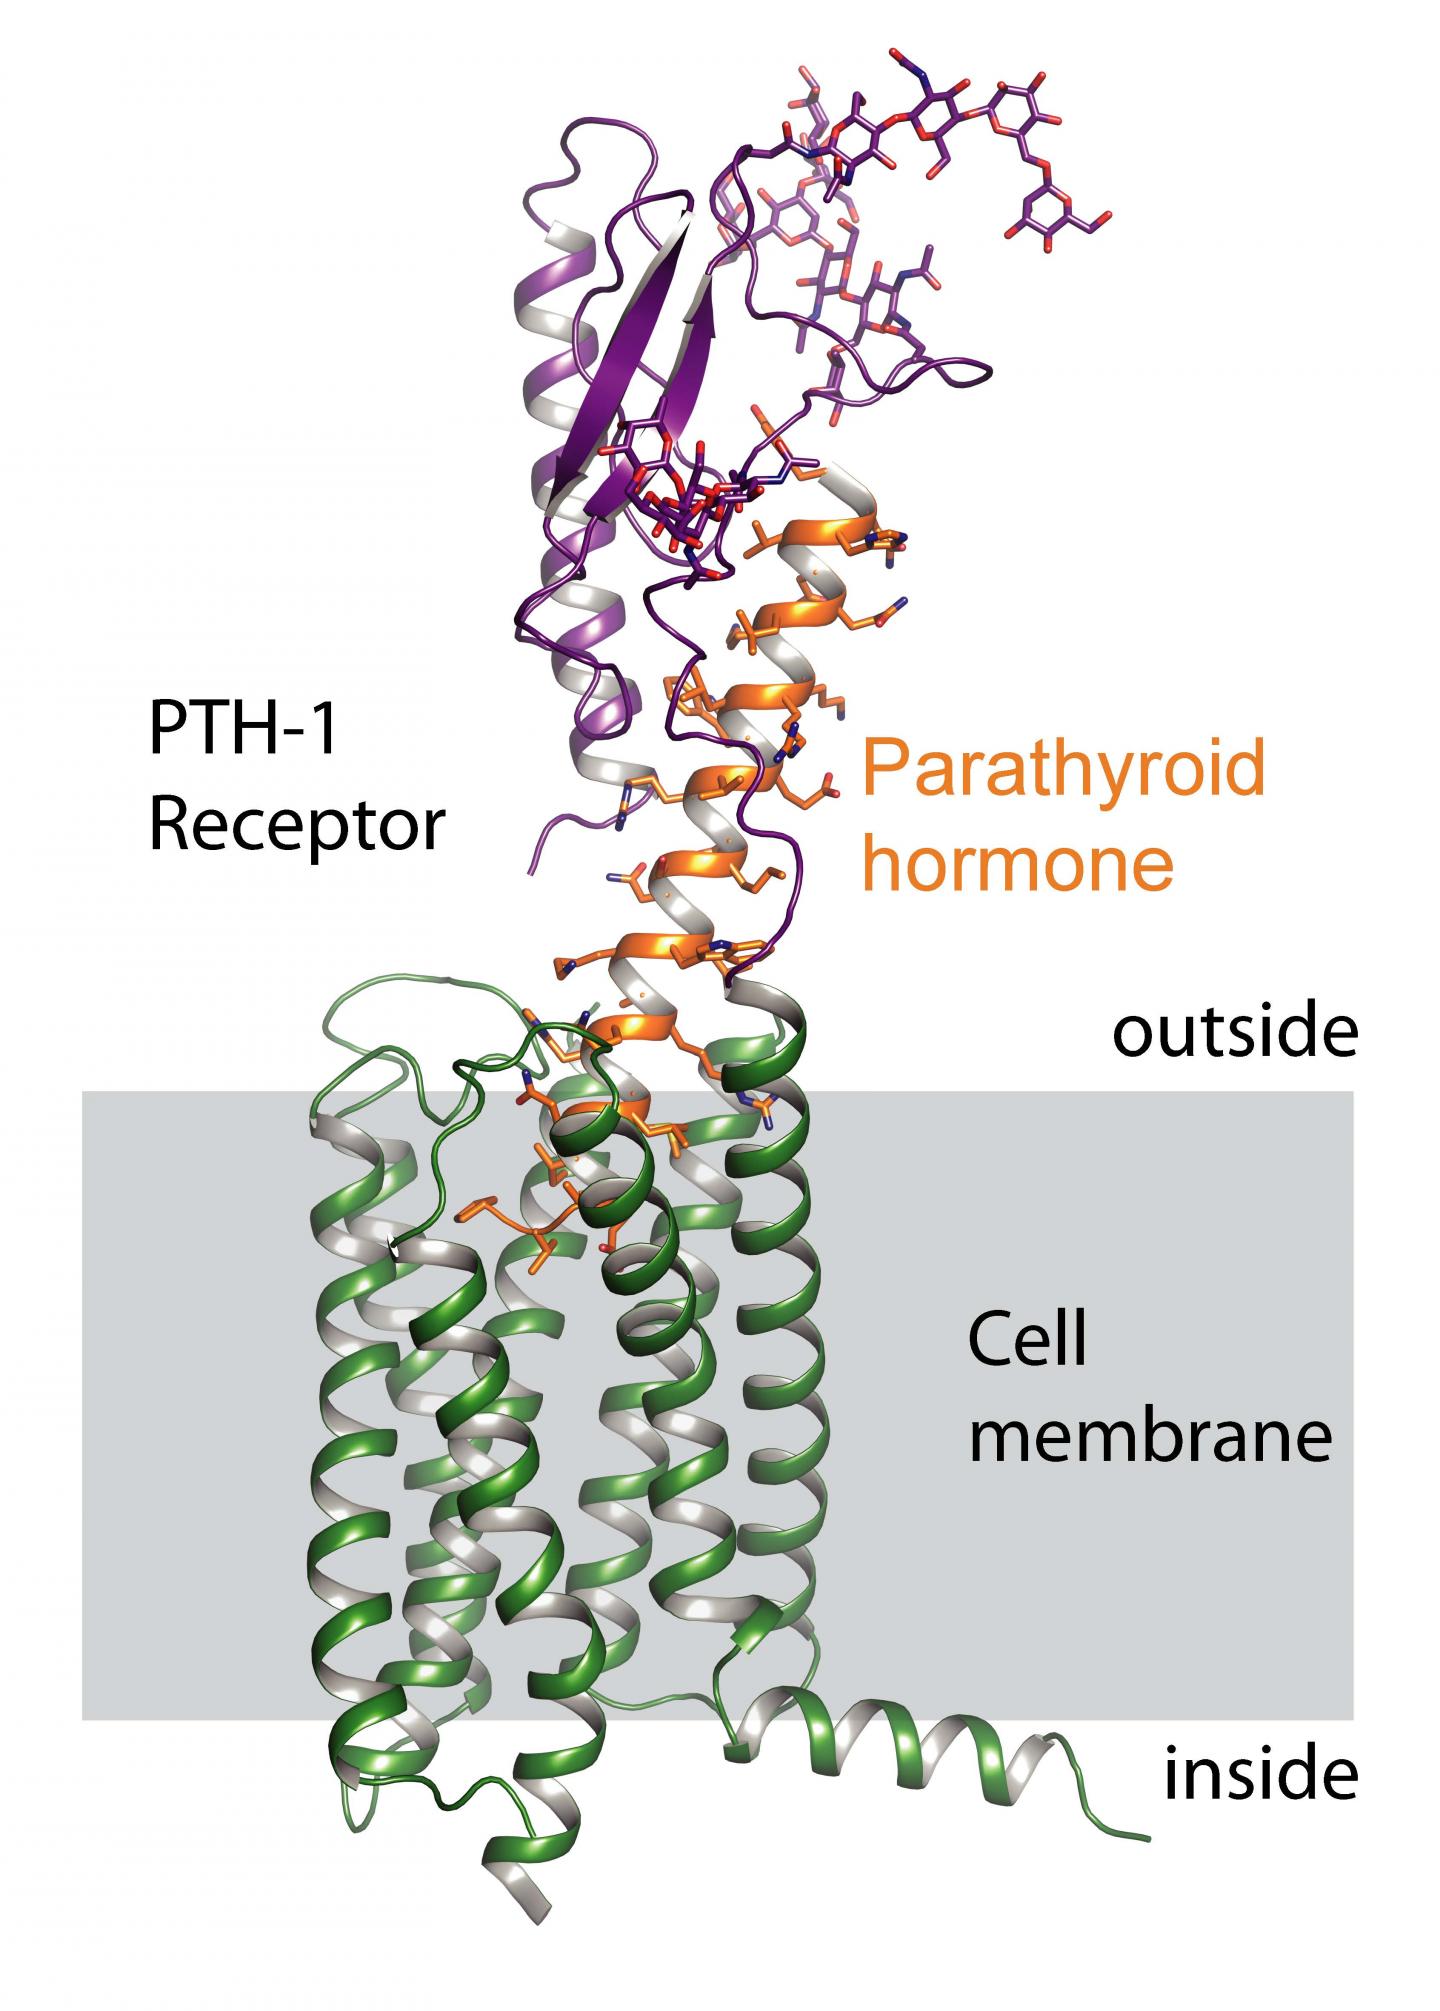 Structure of the PTH-1 Receptor